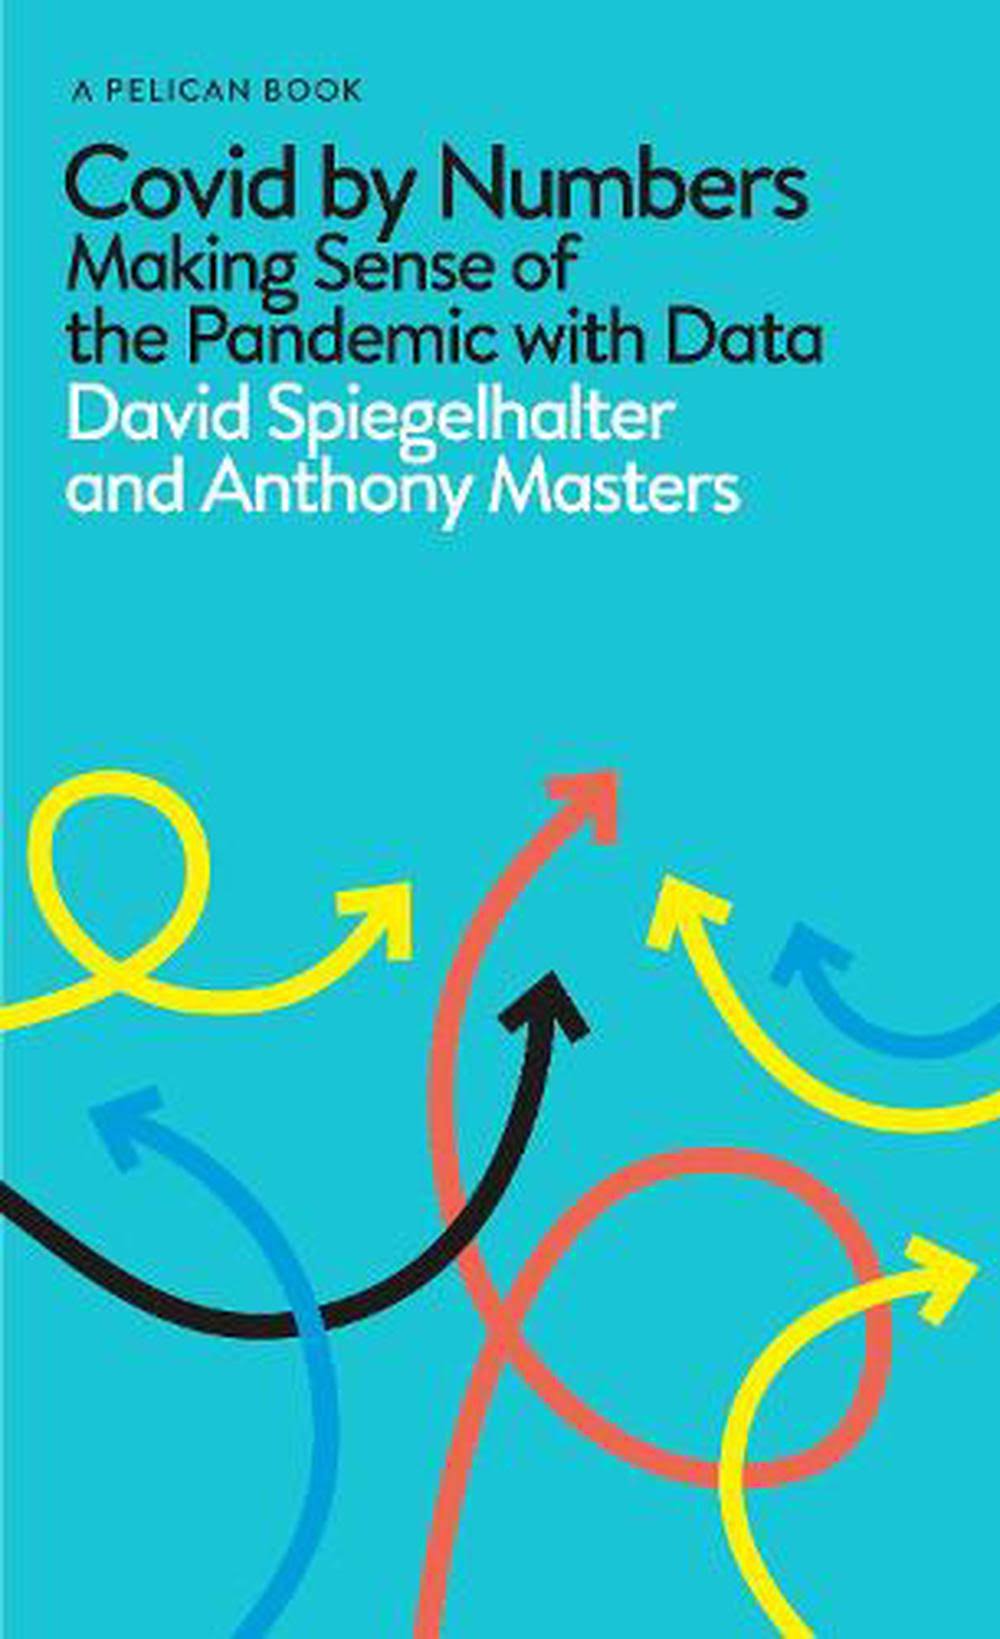 Covid by Numbers: Making Sense of the Pandemic with Data [Book]